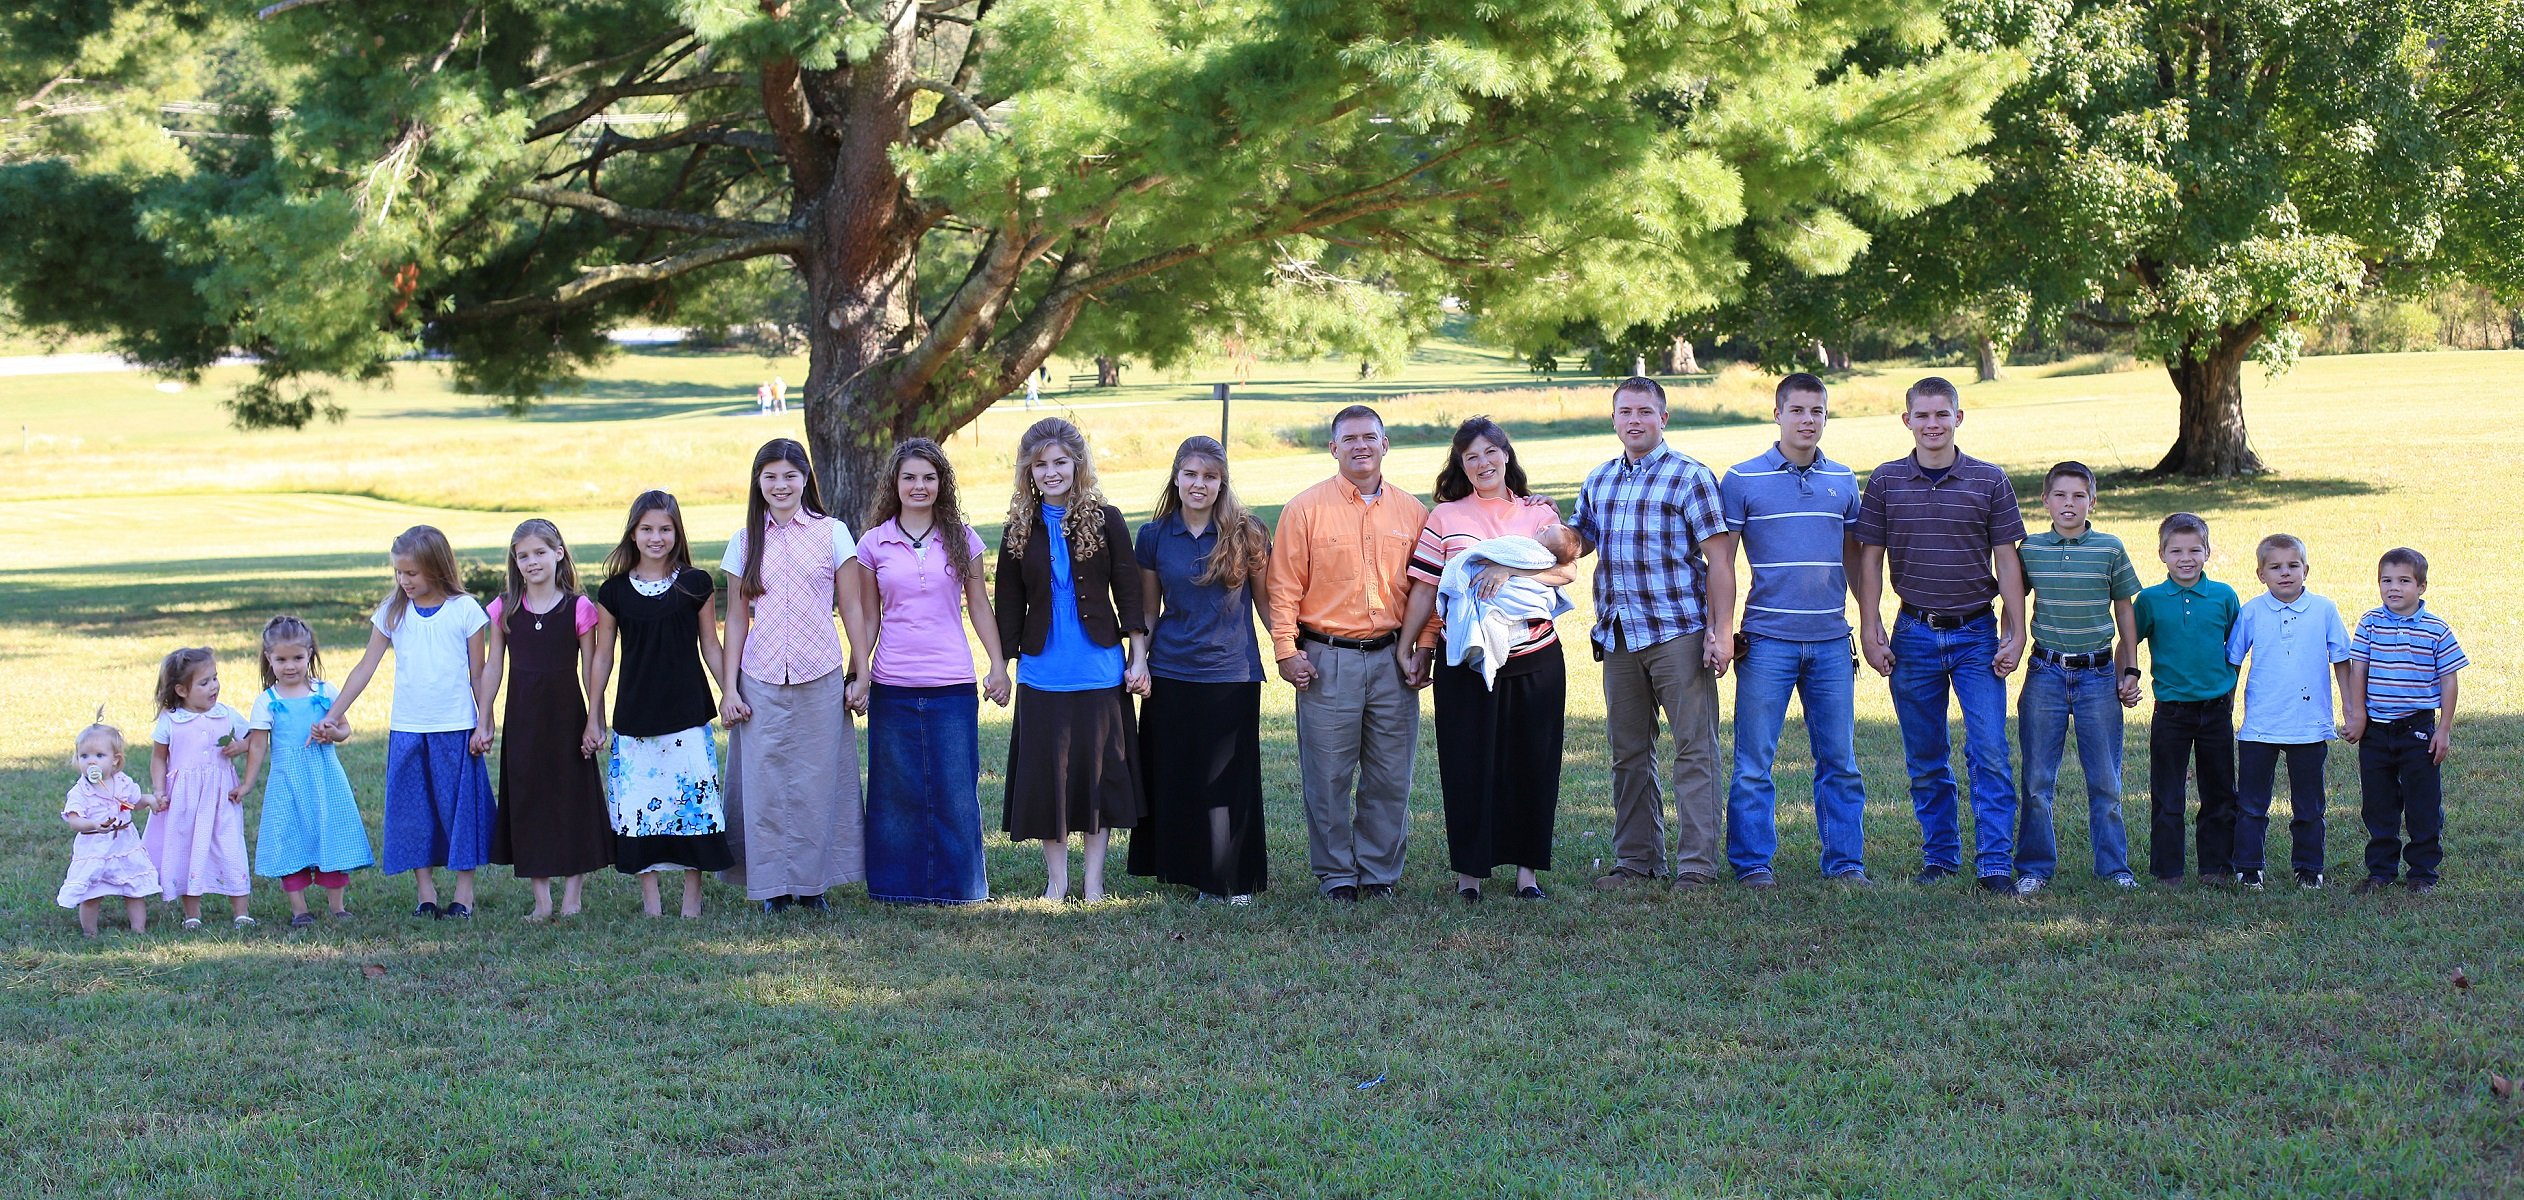 The Bates family stands together on their Tennessee property for a promotional photo.